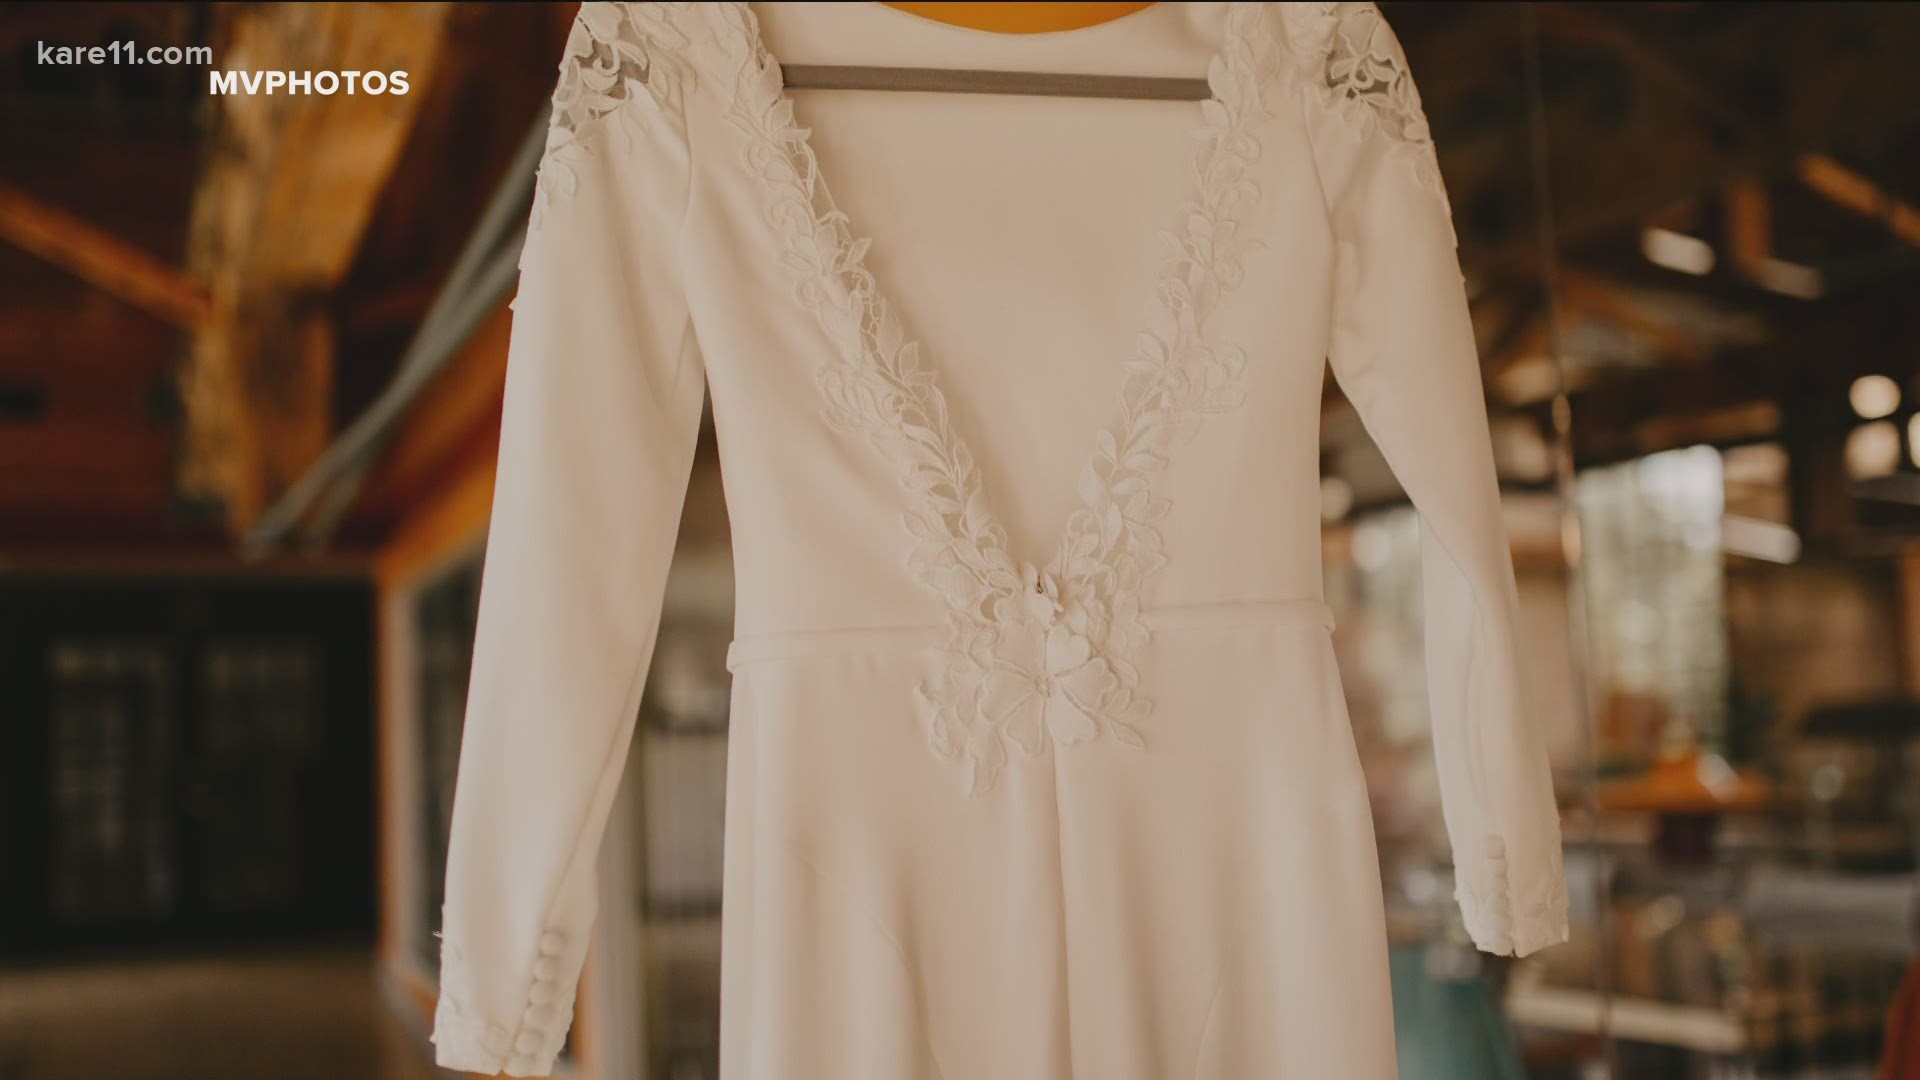 A Minneapolis woman is taking "something borrowed" seriously, offering to lend her designer gown to other brides who can't afford a dress.